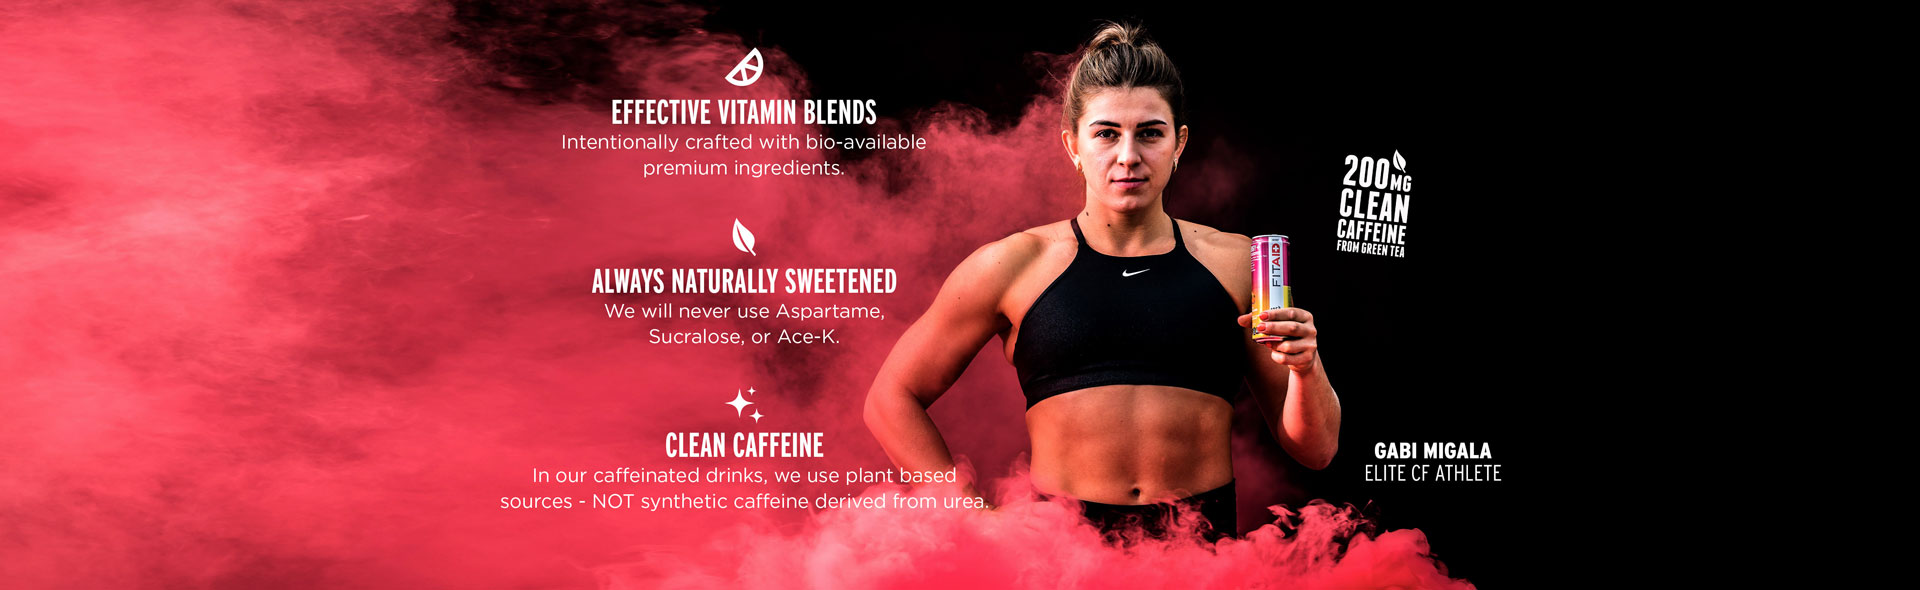 EFFECTIVE VITAMIN BLENDS Intentionally crafted with bio-available premium ingredients, ALWAYS NATURALLY SWEETENED We will never use Aspartame, Sucralose, or Ace-K, CLEAN CAFFEINE In our caffeinated drinks, we use plant based sources - NOT synthetic caffeine derived from urea